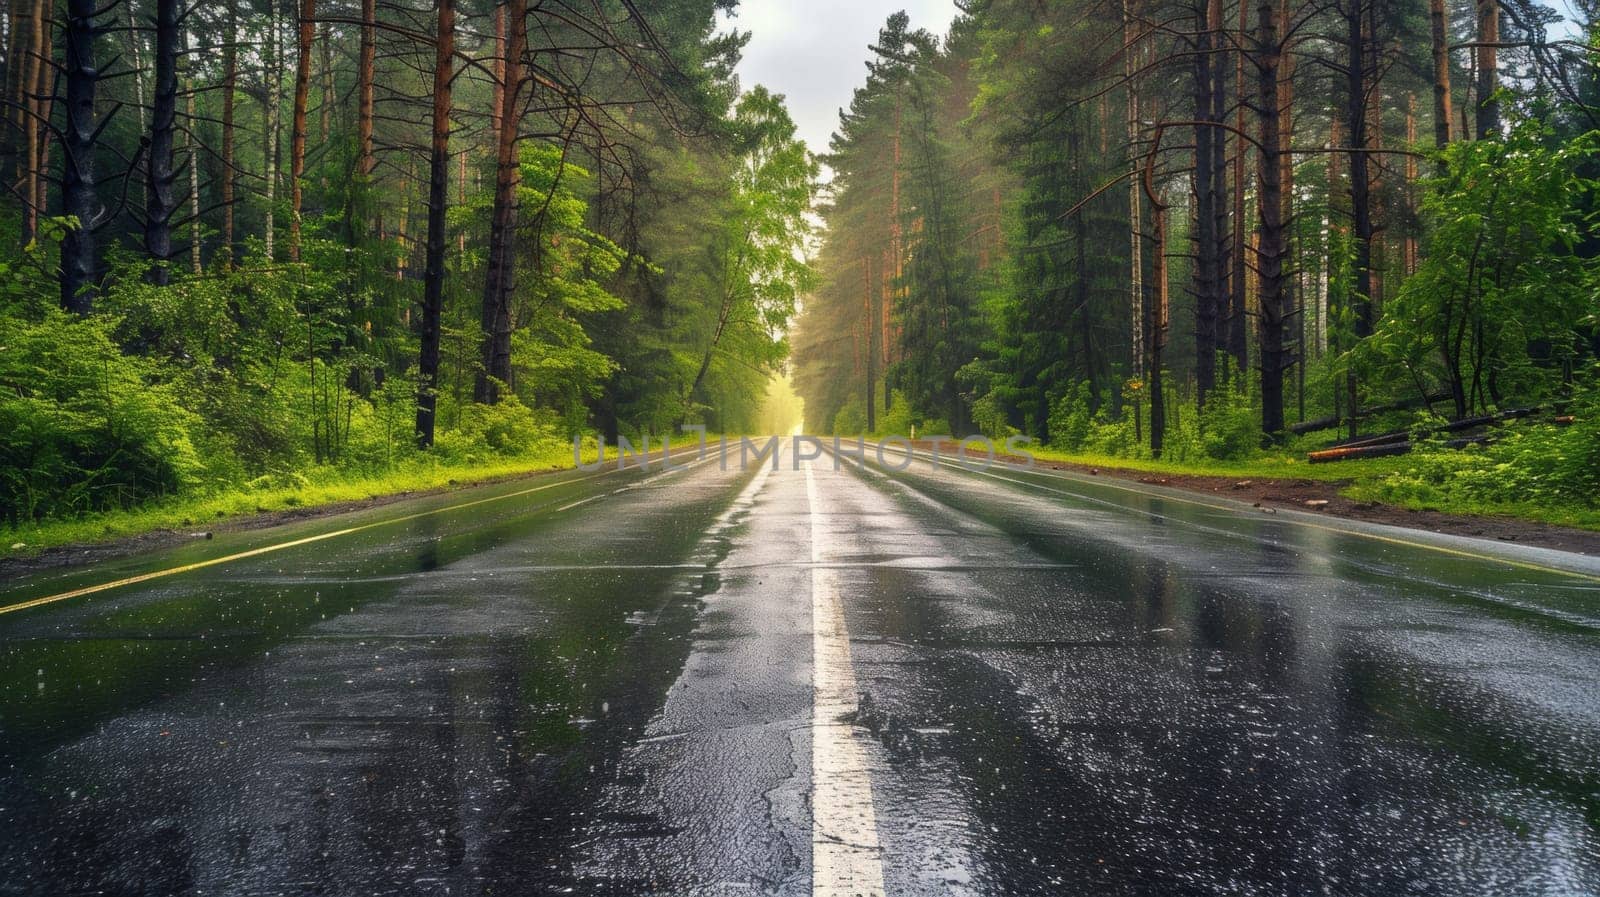 A wet road with a green forest in the background